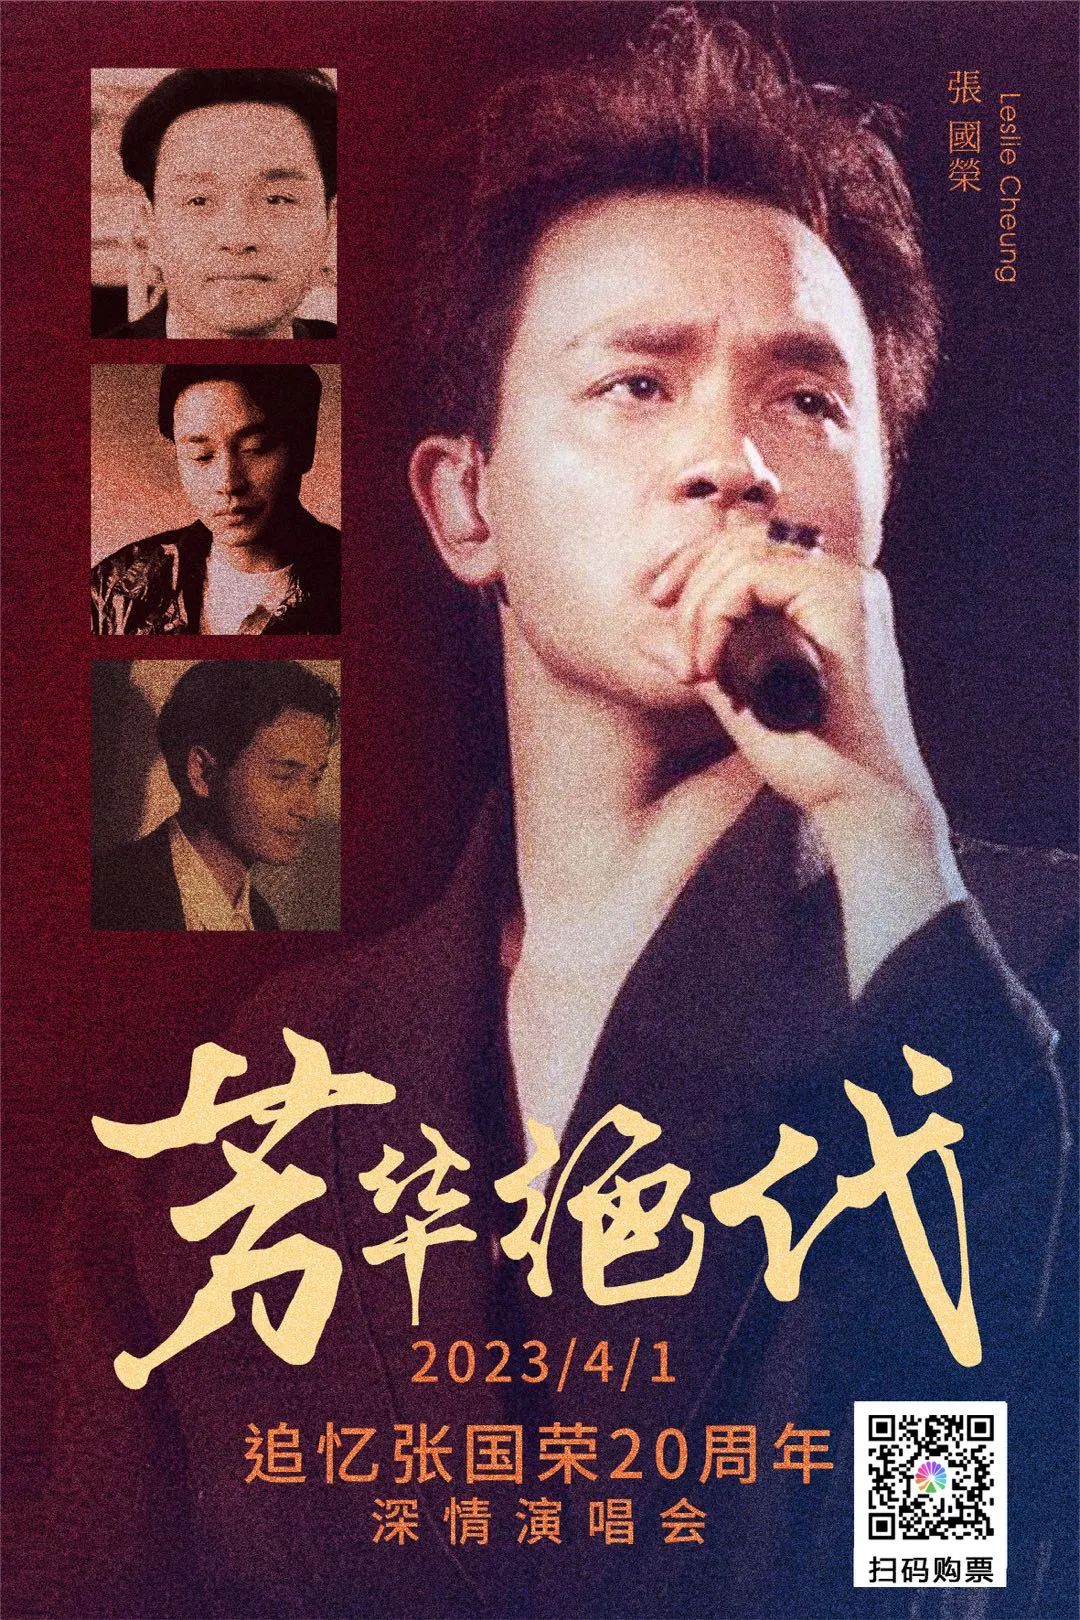 Memories of Leslie Cheung at Yue Space the Beijinger